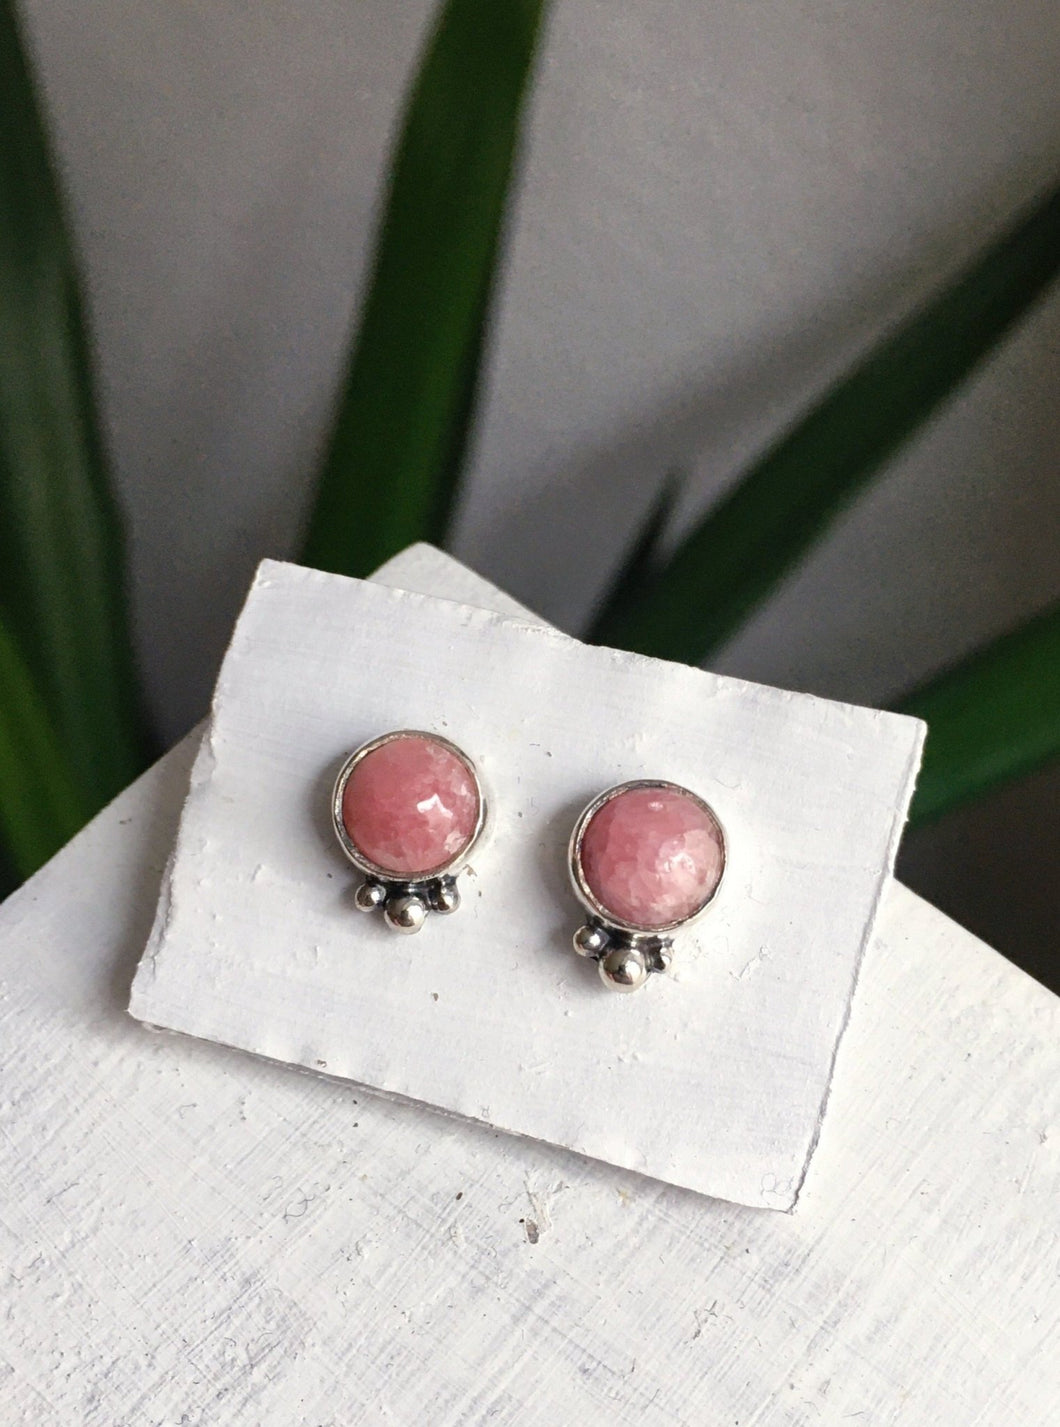 A pair of Rhodochrosite Studs by Kathrin Jona on a white table.